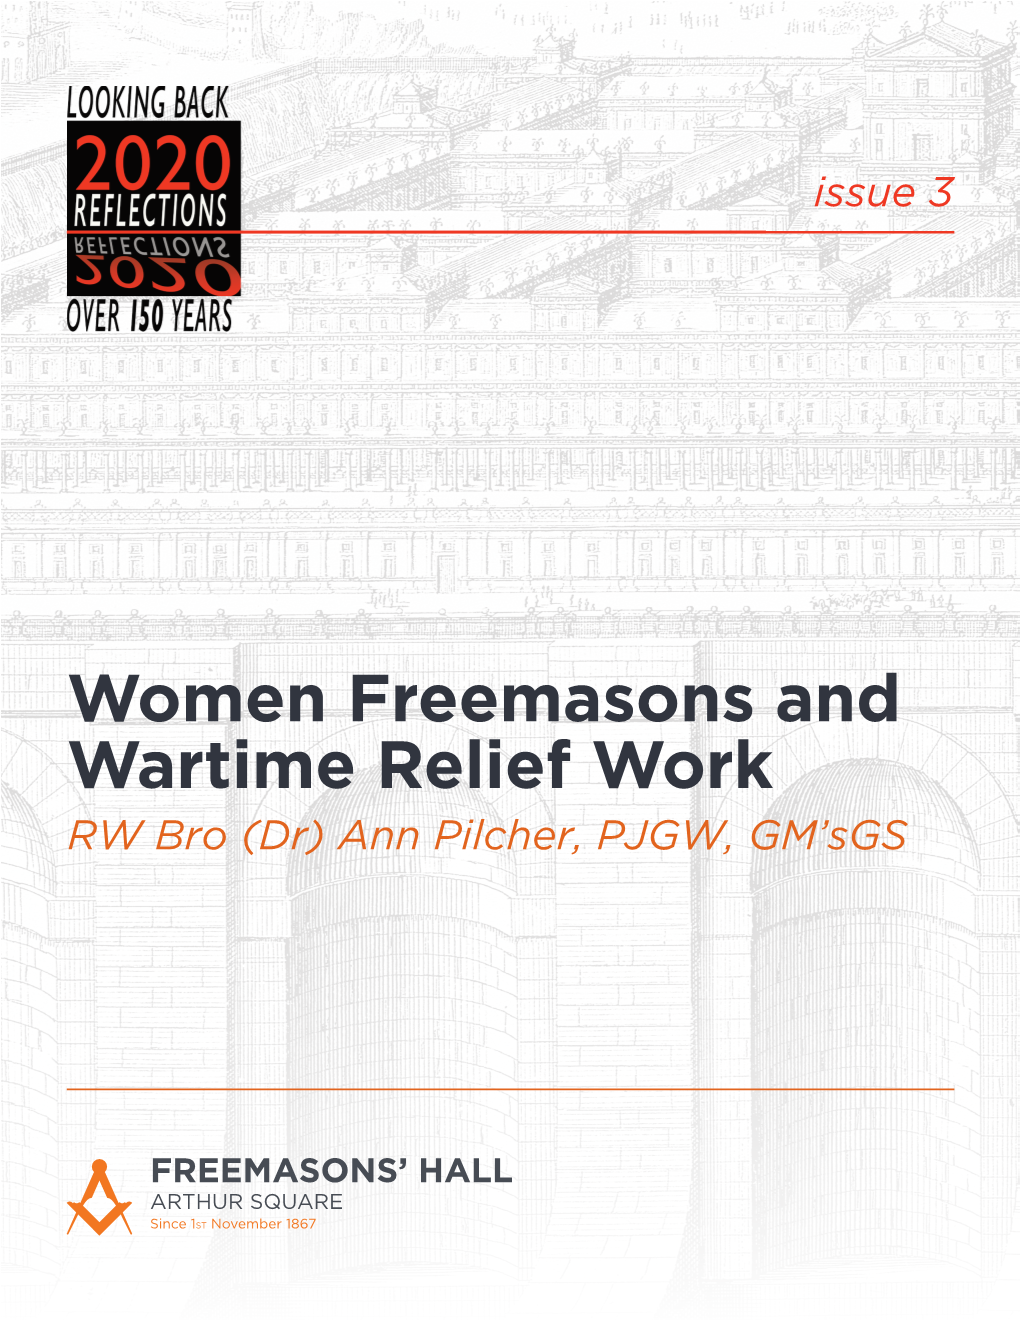 Issue 3 Women Freemasons and Wartime Relief Work